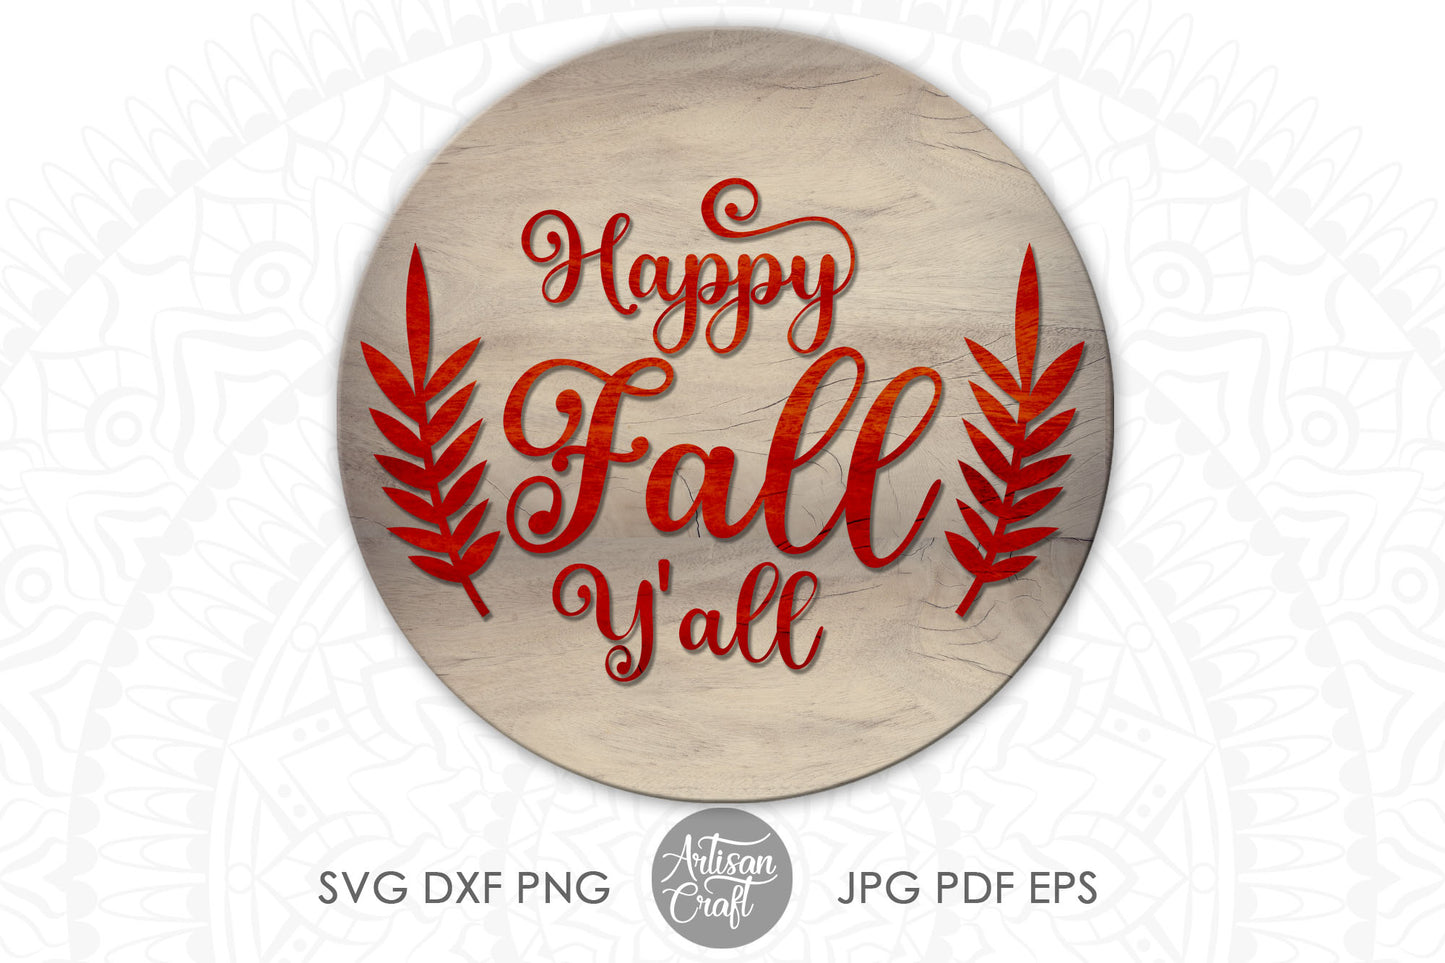 Happy fall Y'all SVG cut file for laser and die cutting